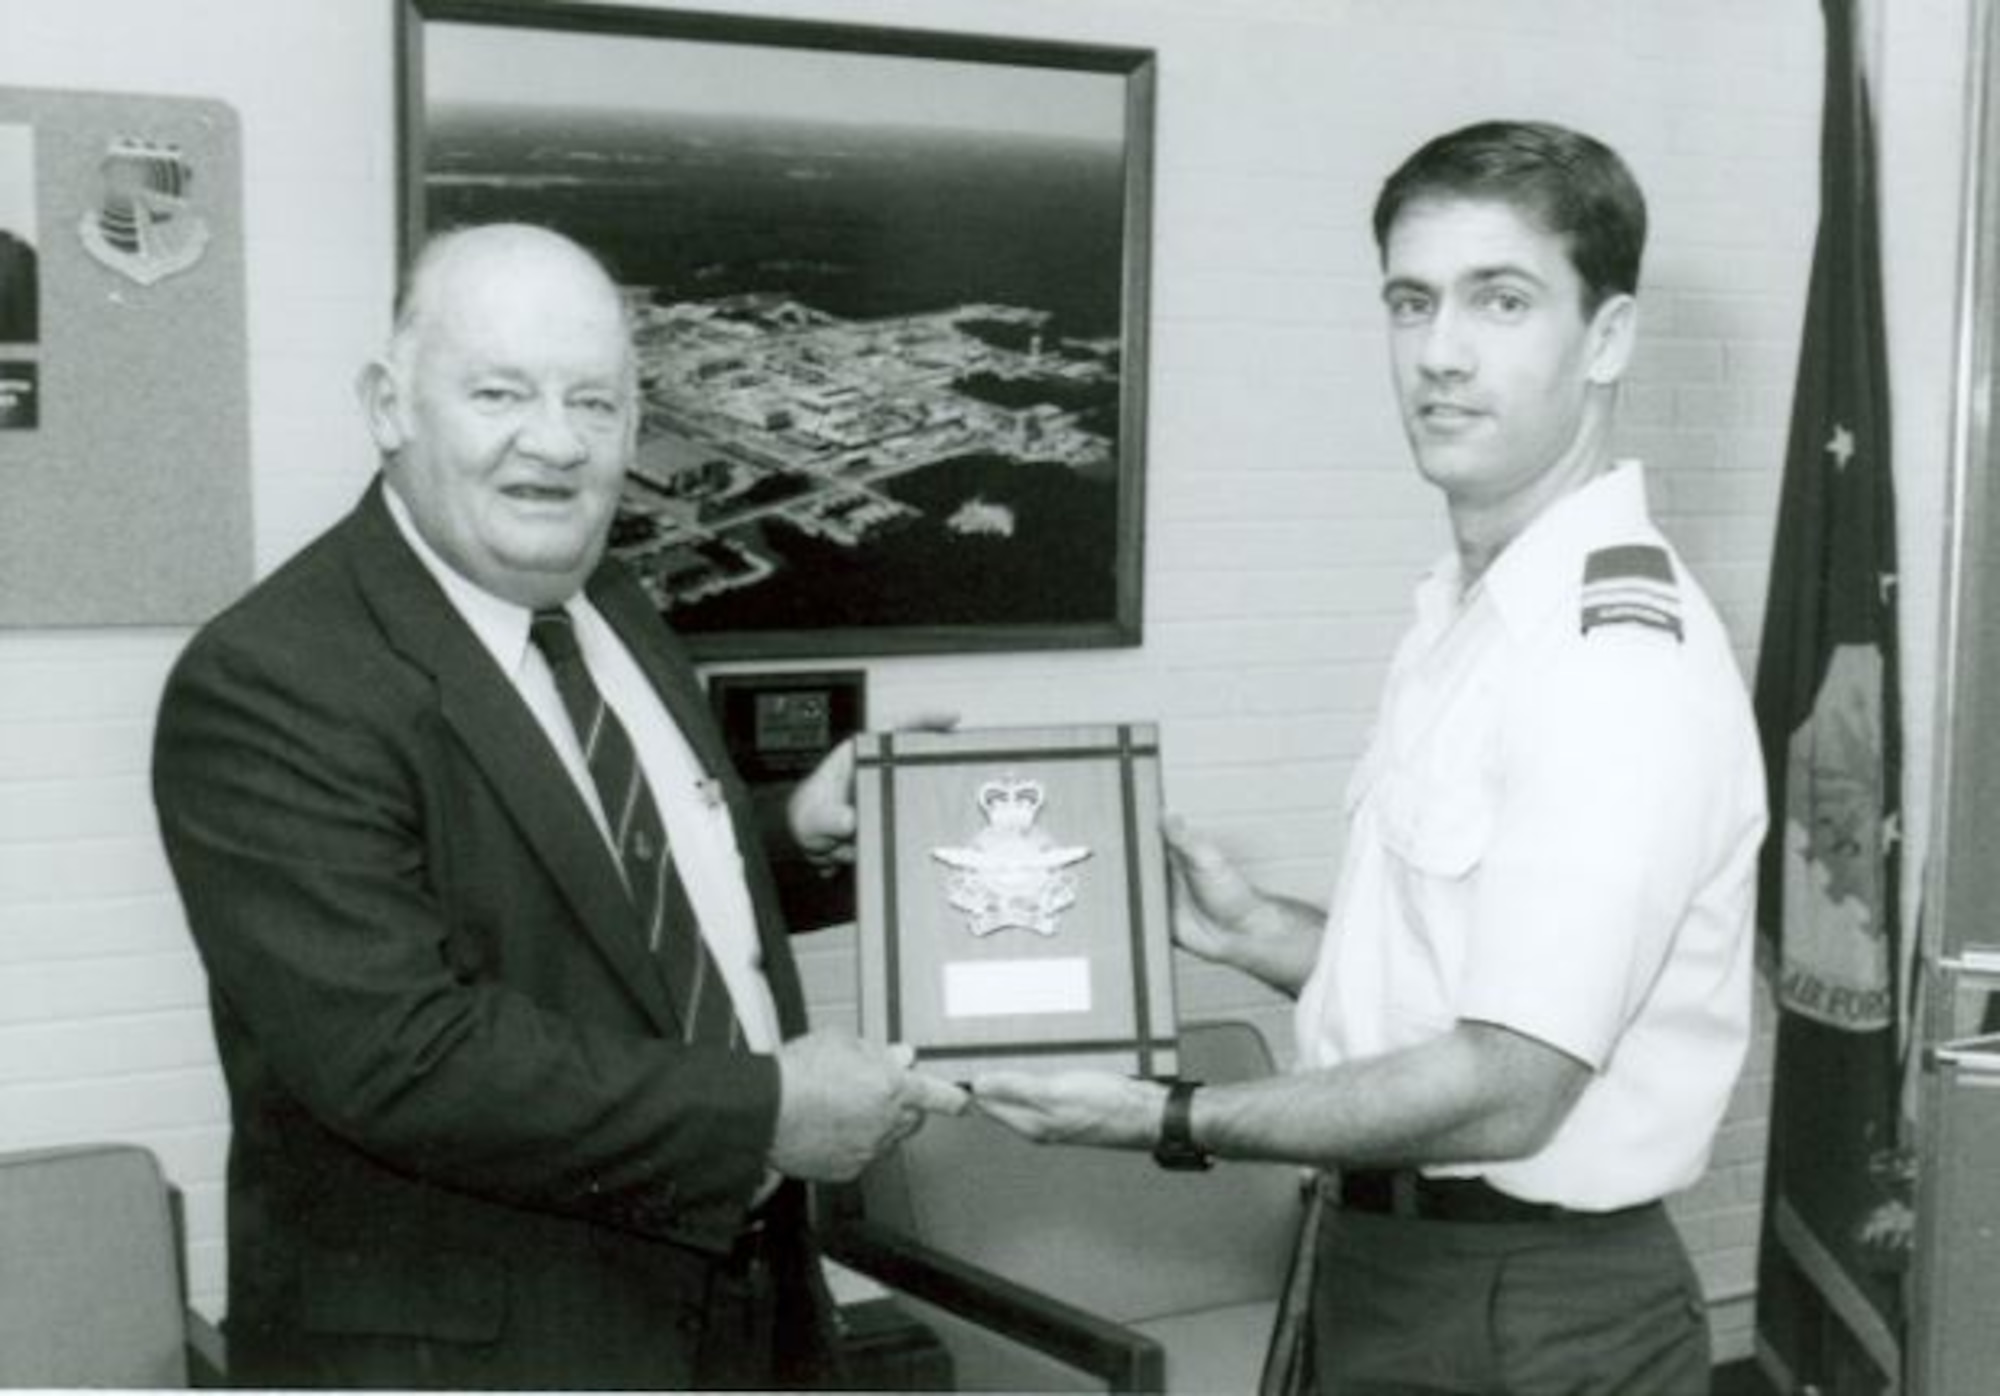 Richard Austin, left, then-director of Propulsion Test at Arnold Engineering Development Center, later known as Arnold Engineering Development Complex, is honored in 1993 as the “founding father” of the Master Data Exchange Agreement between the U.S. and Canada. Austin was honored by the National Research Council of Canada for an agreement he spearheaded which allowed propulsion testing and measurement techniques associated with all types of airbreathing engines to be exchanged between the two governments in an effort to enhance global communication and technical knowledge. Capt. Dan Magee, then-resident Canadian exchange officer at AEDC, is pictured presenting Austin with his plaque. (U.S. Air Force photo)